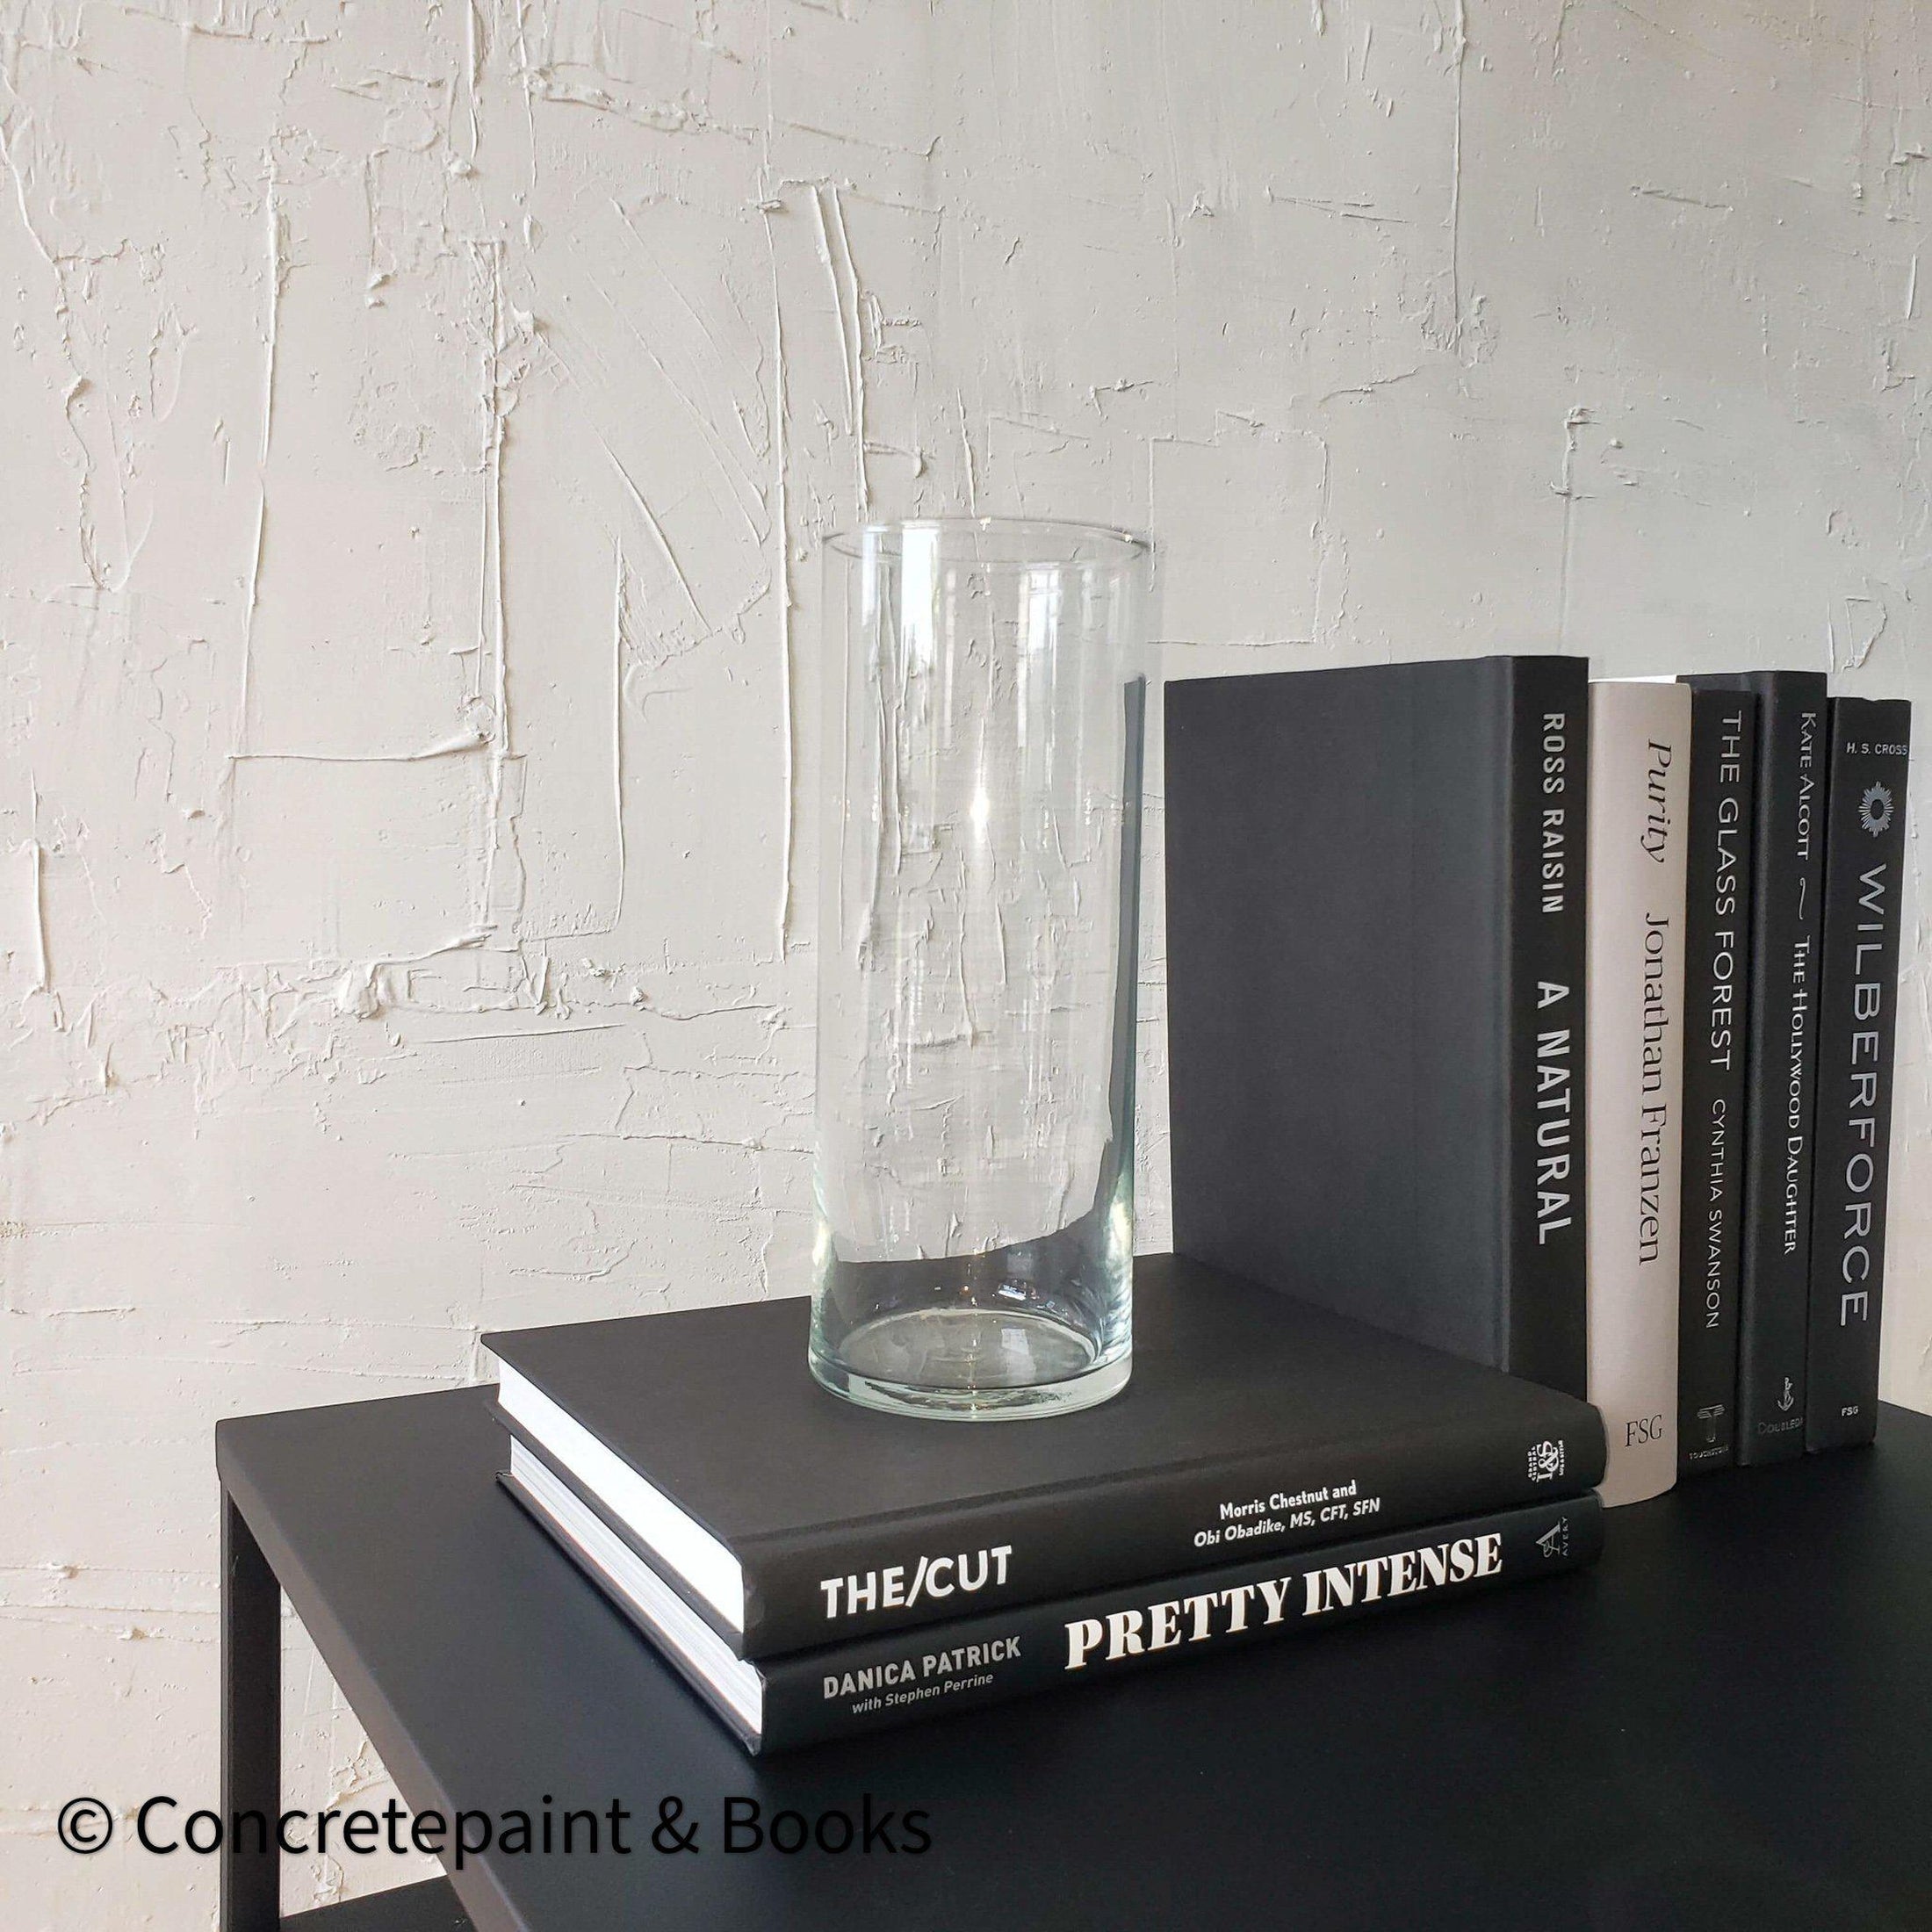 Hardcover books and glass vase staged for display. Stack of hardcover books in purplish gray and black.